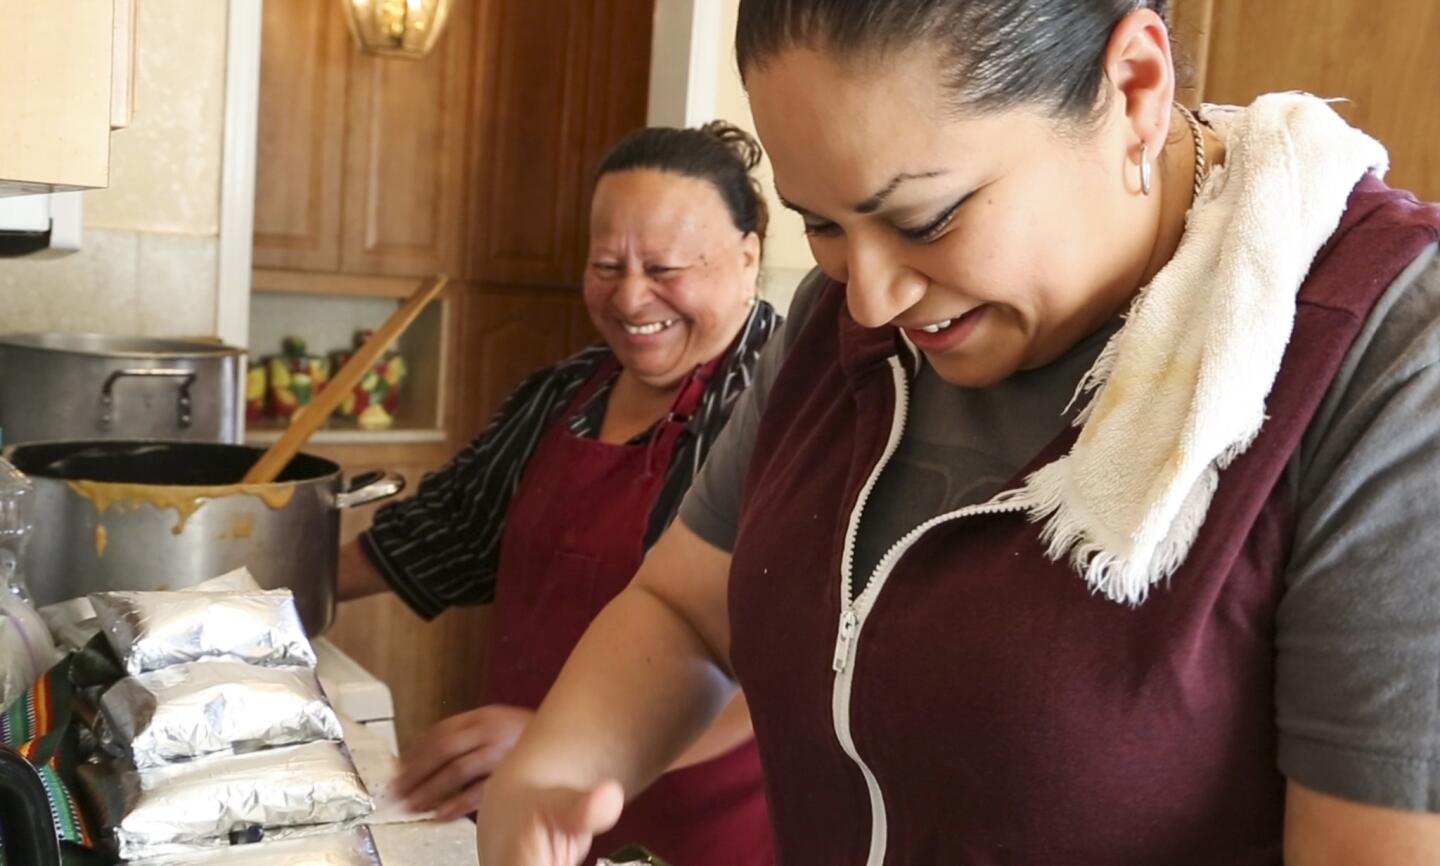 Dora Gonzalez, left, and her daughter, Cynthia, get together in the family kitchen in Inglewood to make Salvadoran tamales from a family recipe passed down for generations.